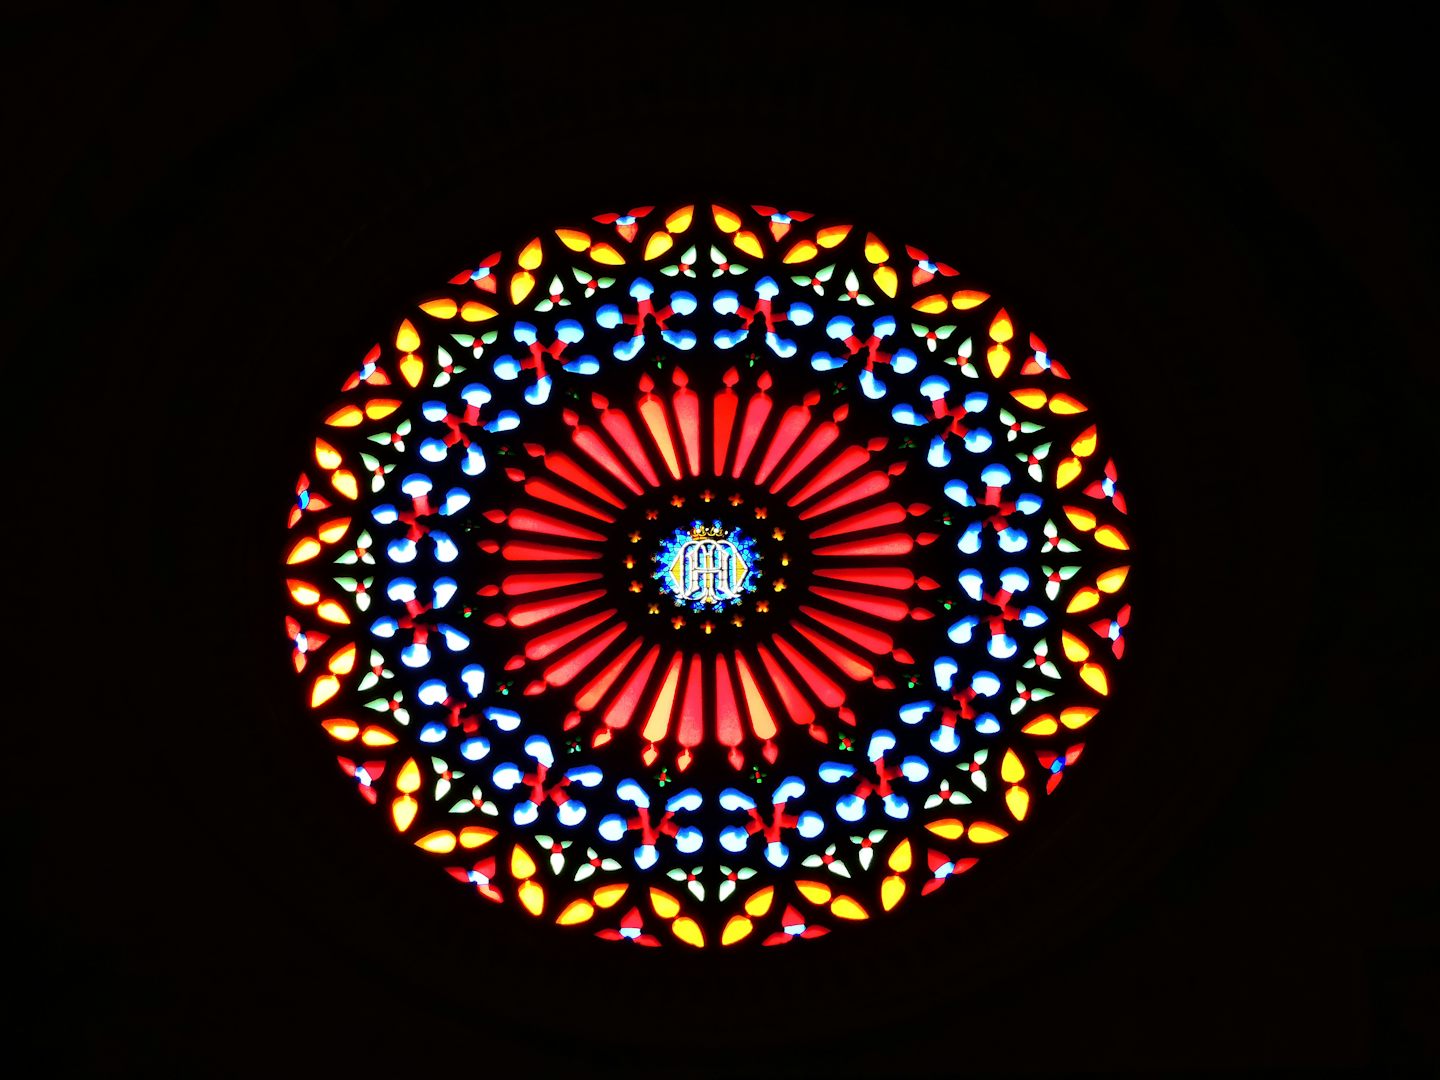 One of many stain glass windows